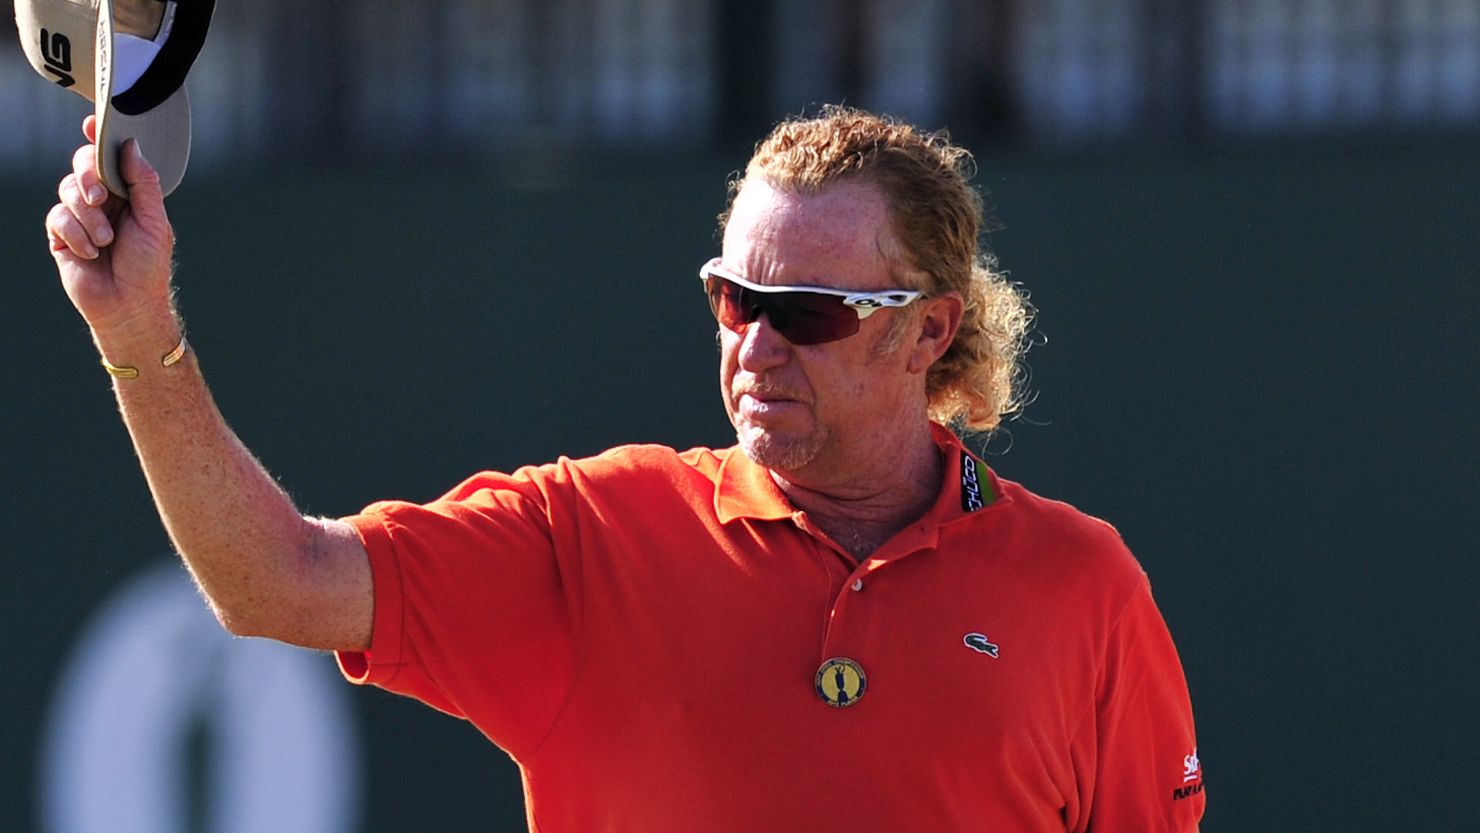 Miguel Angel Jimenez put up another superb display at Muirfield to claim the halfway lead at the British Open. 